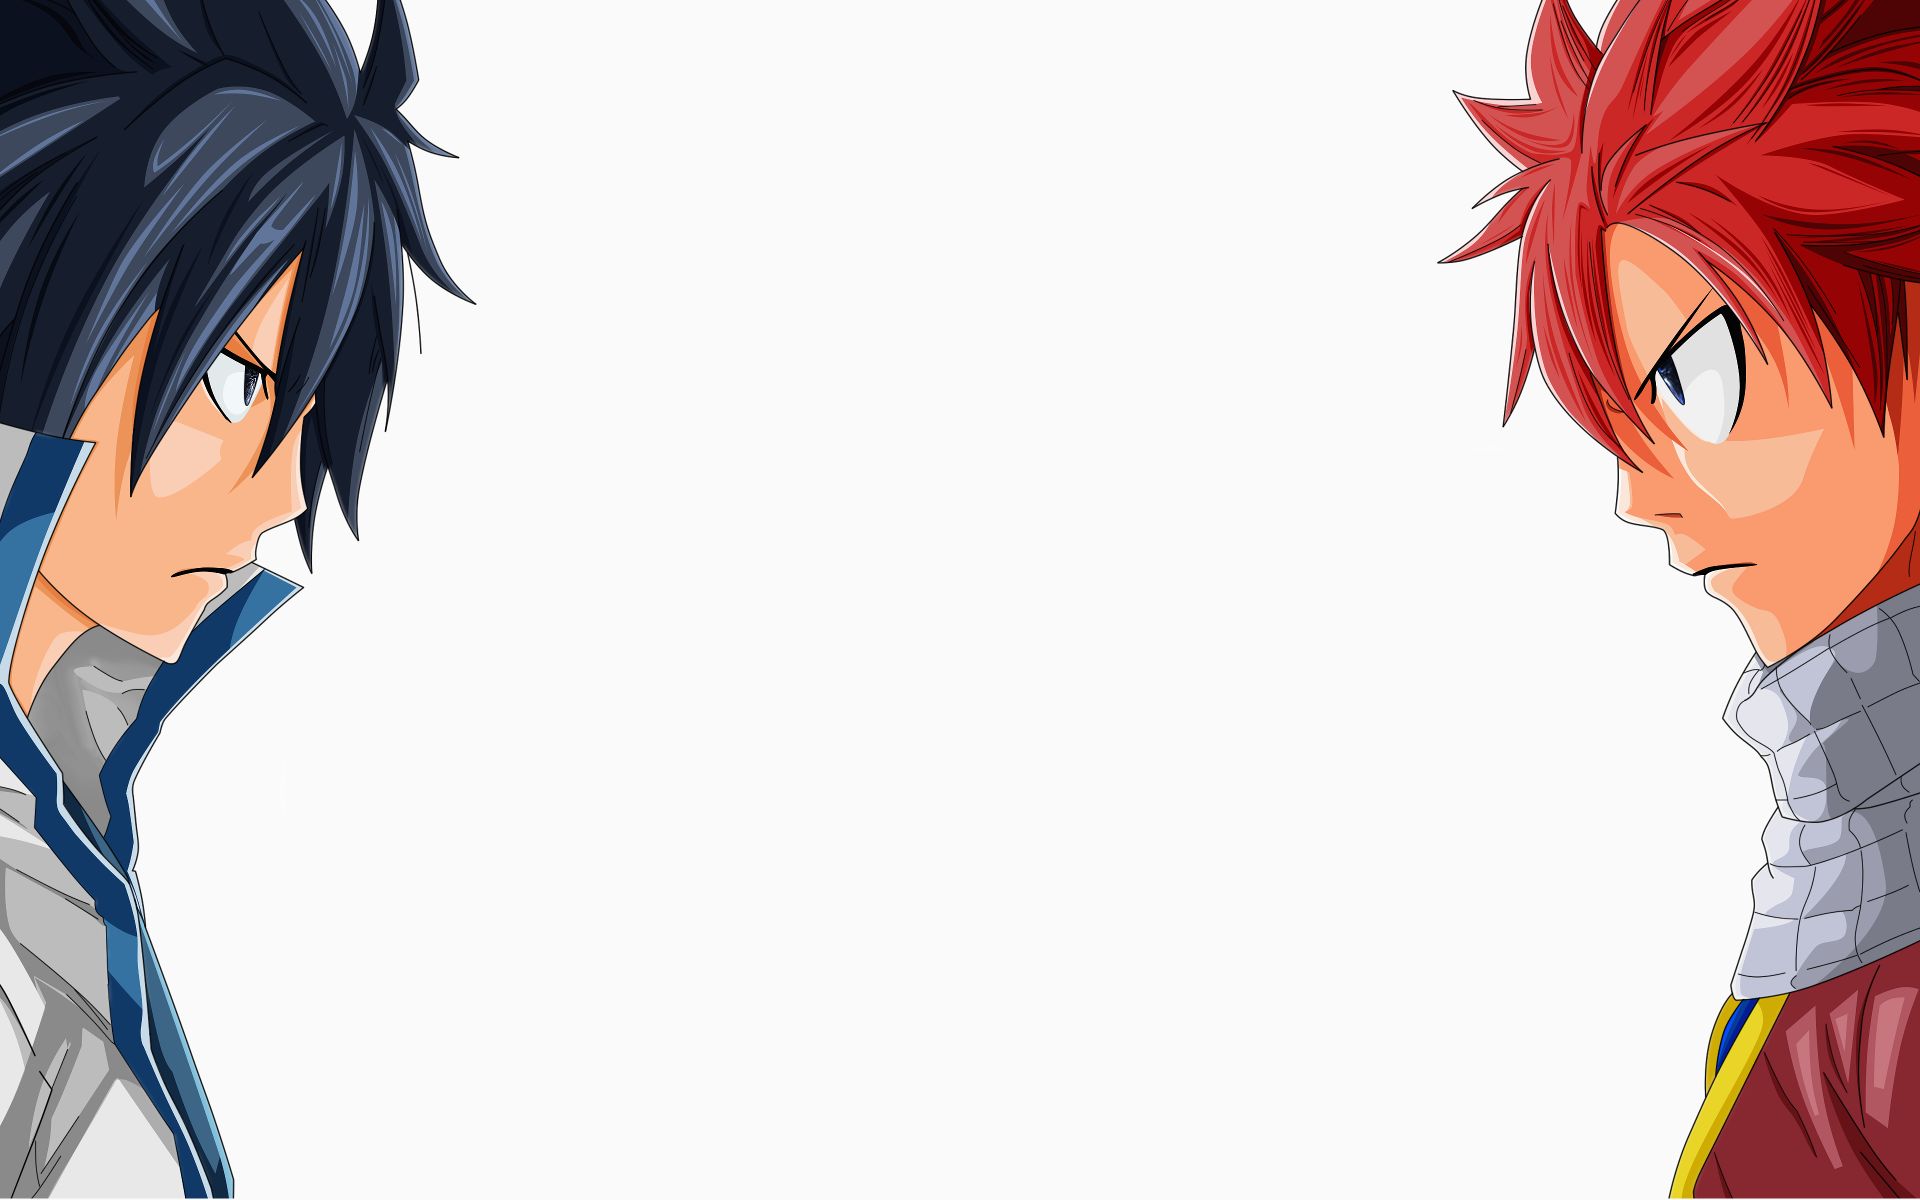 Fairy Tail Natsu and Gray Wallpaper by SpringLockCharge on DeviantArt